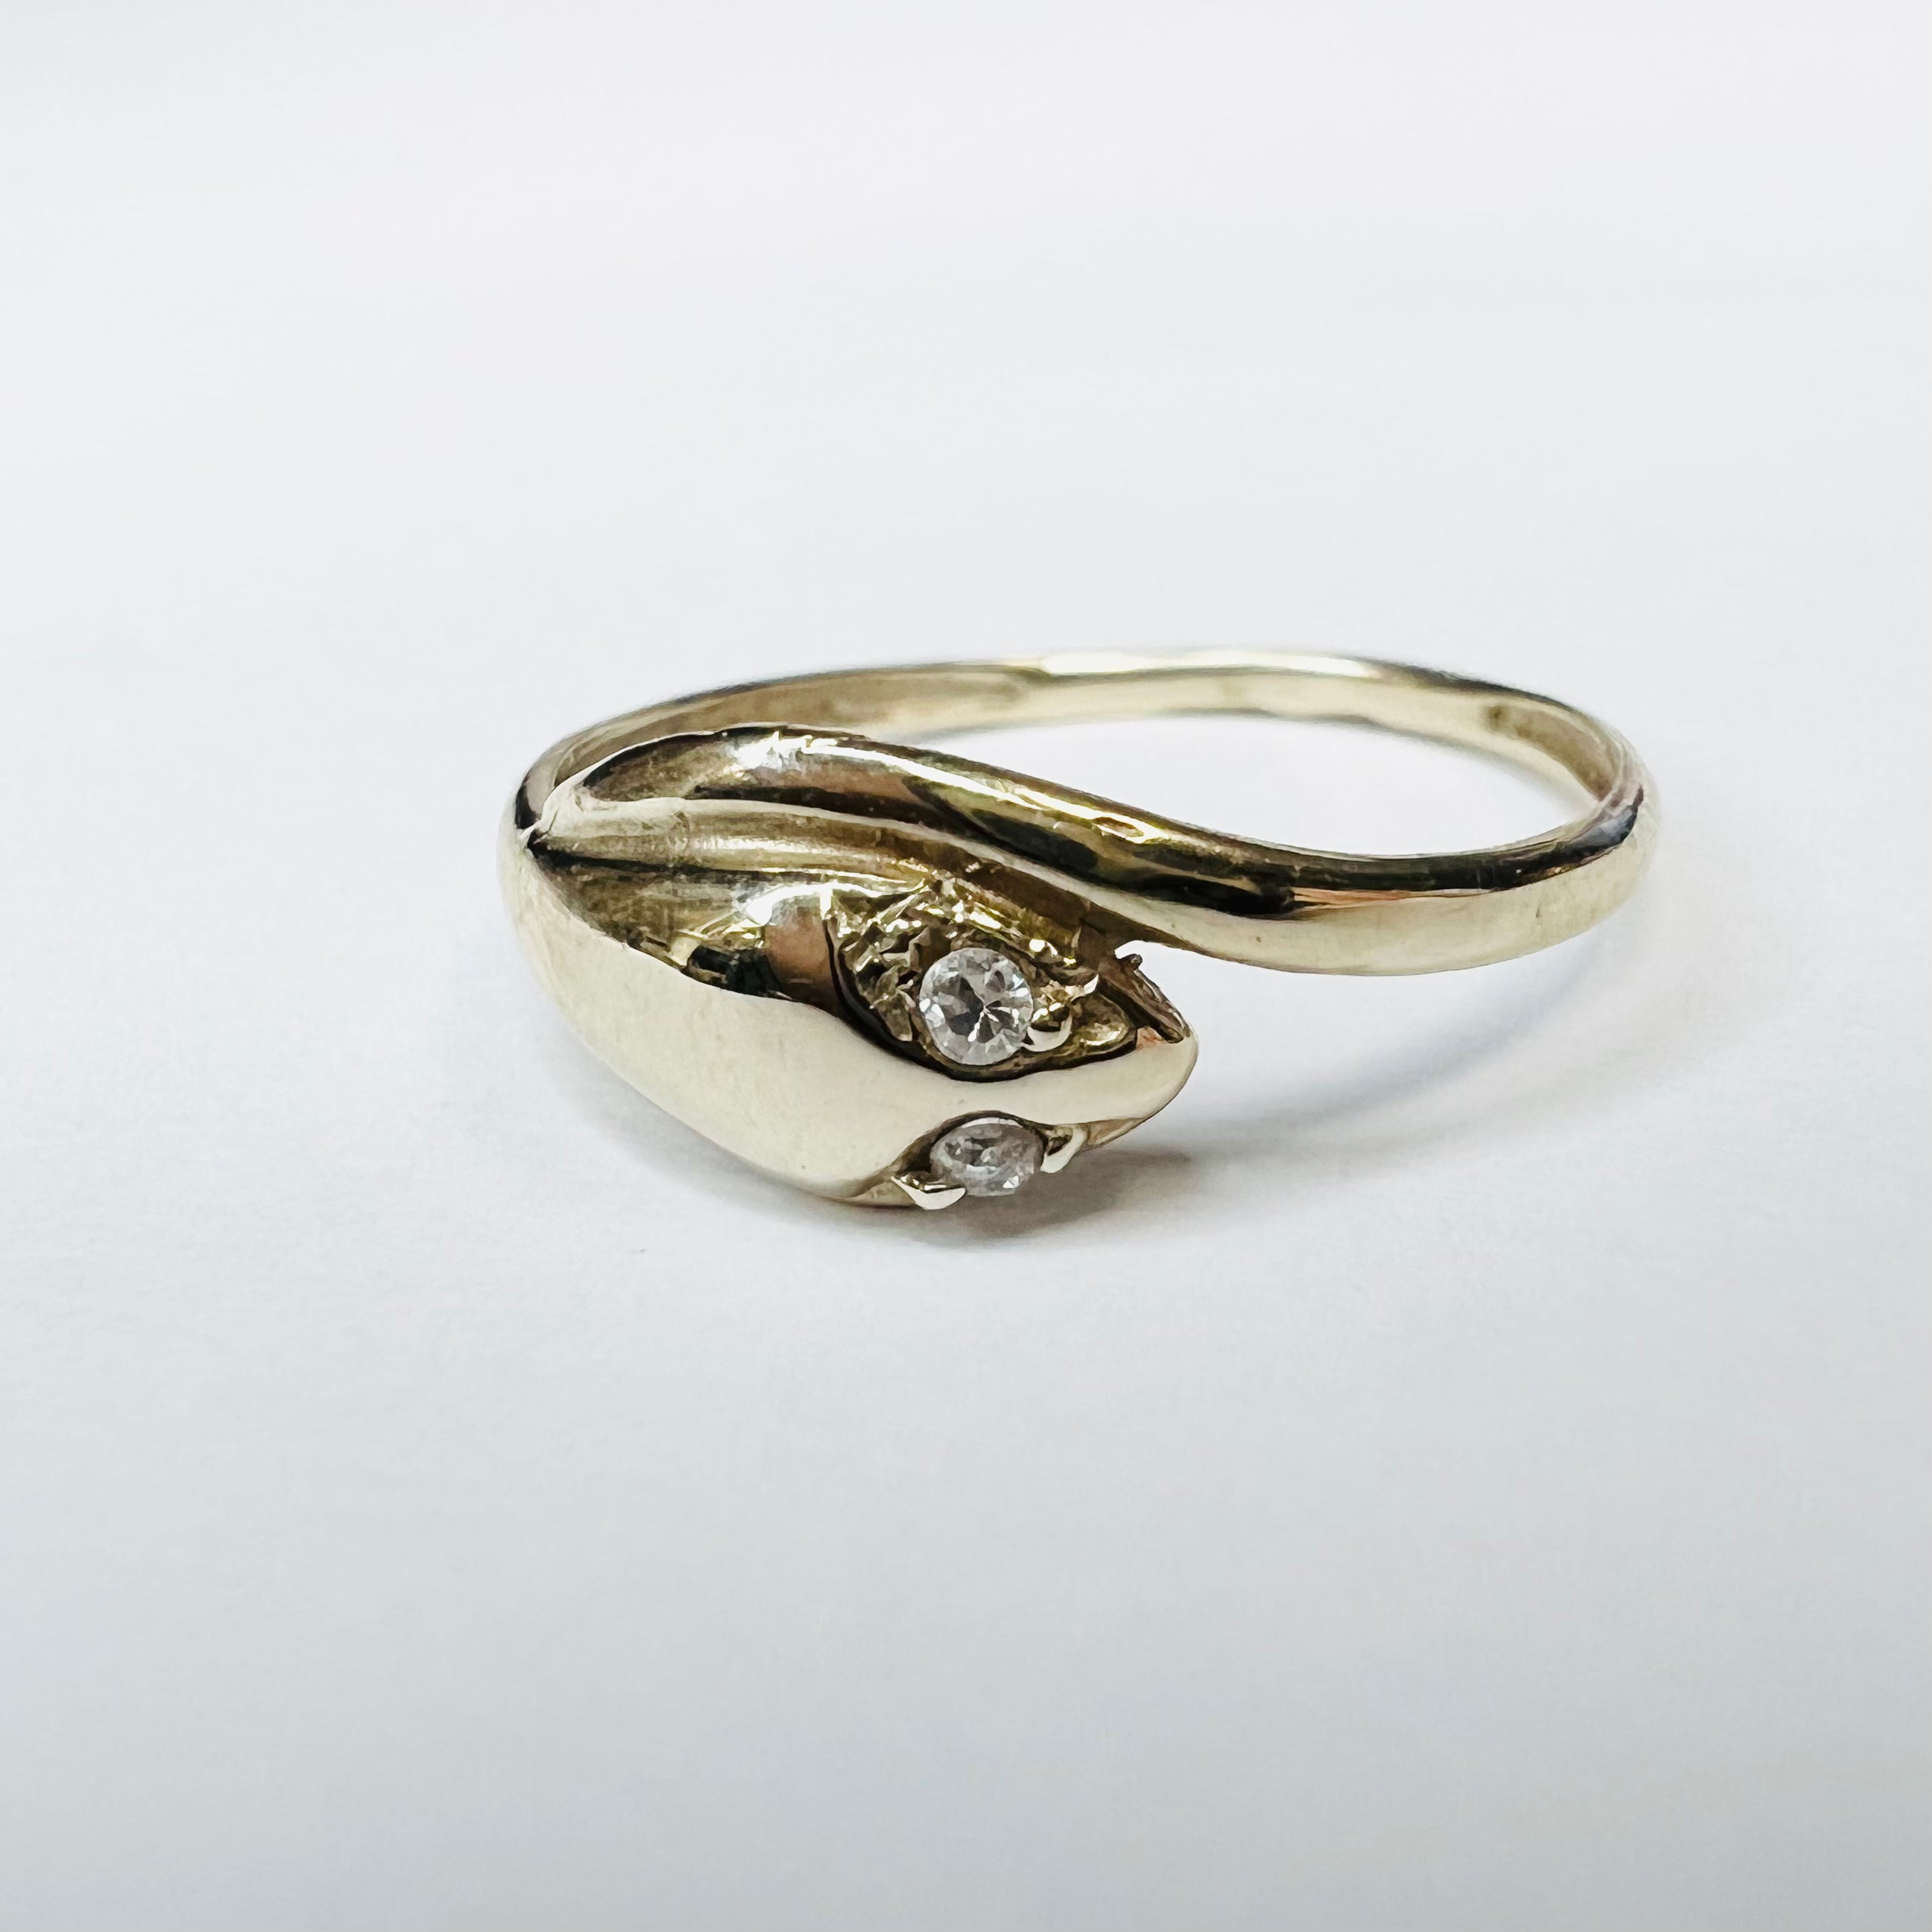 Solid 18K Yellow Gold Diamond Eyed Coiled Snake Ring Size 6